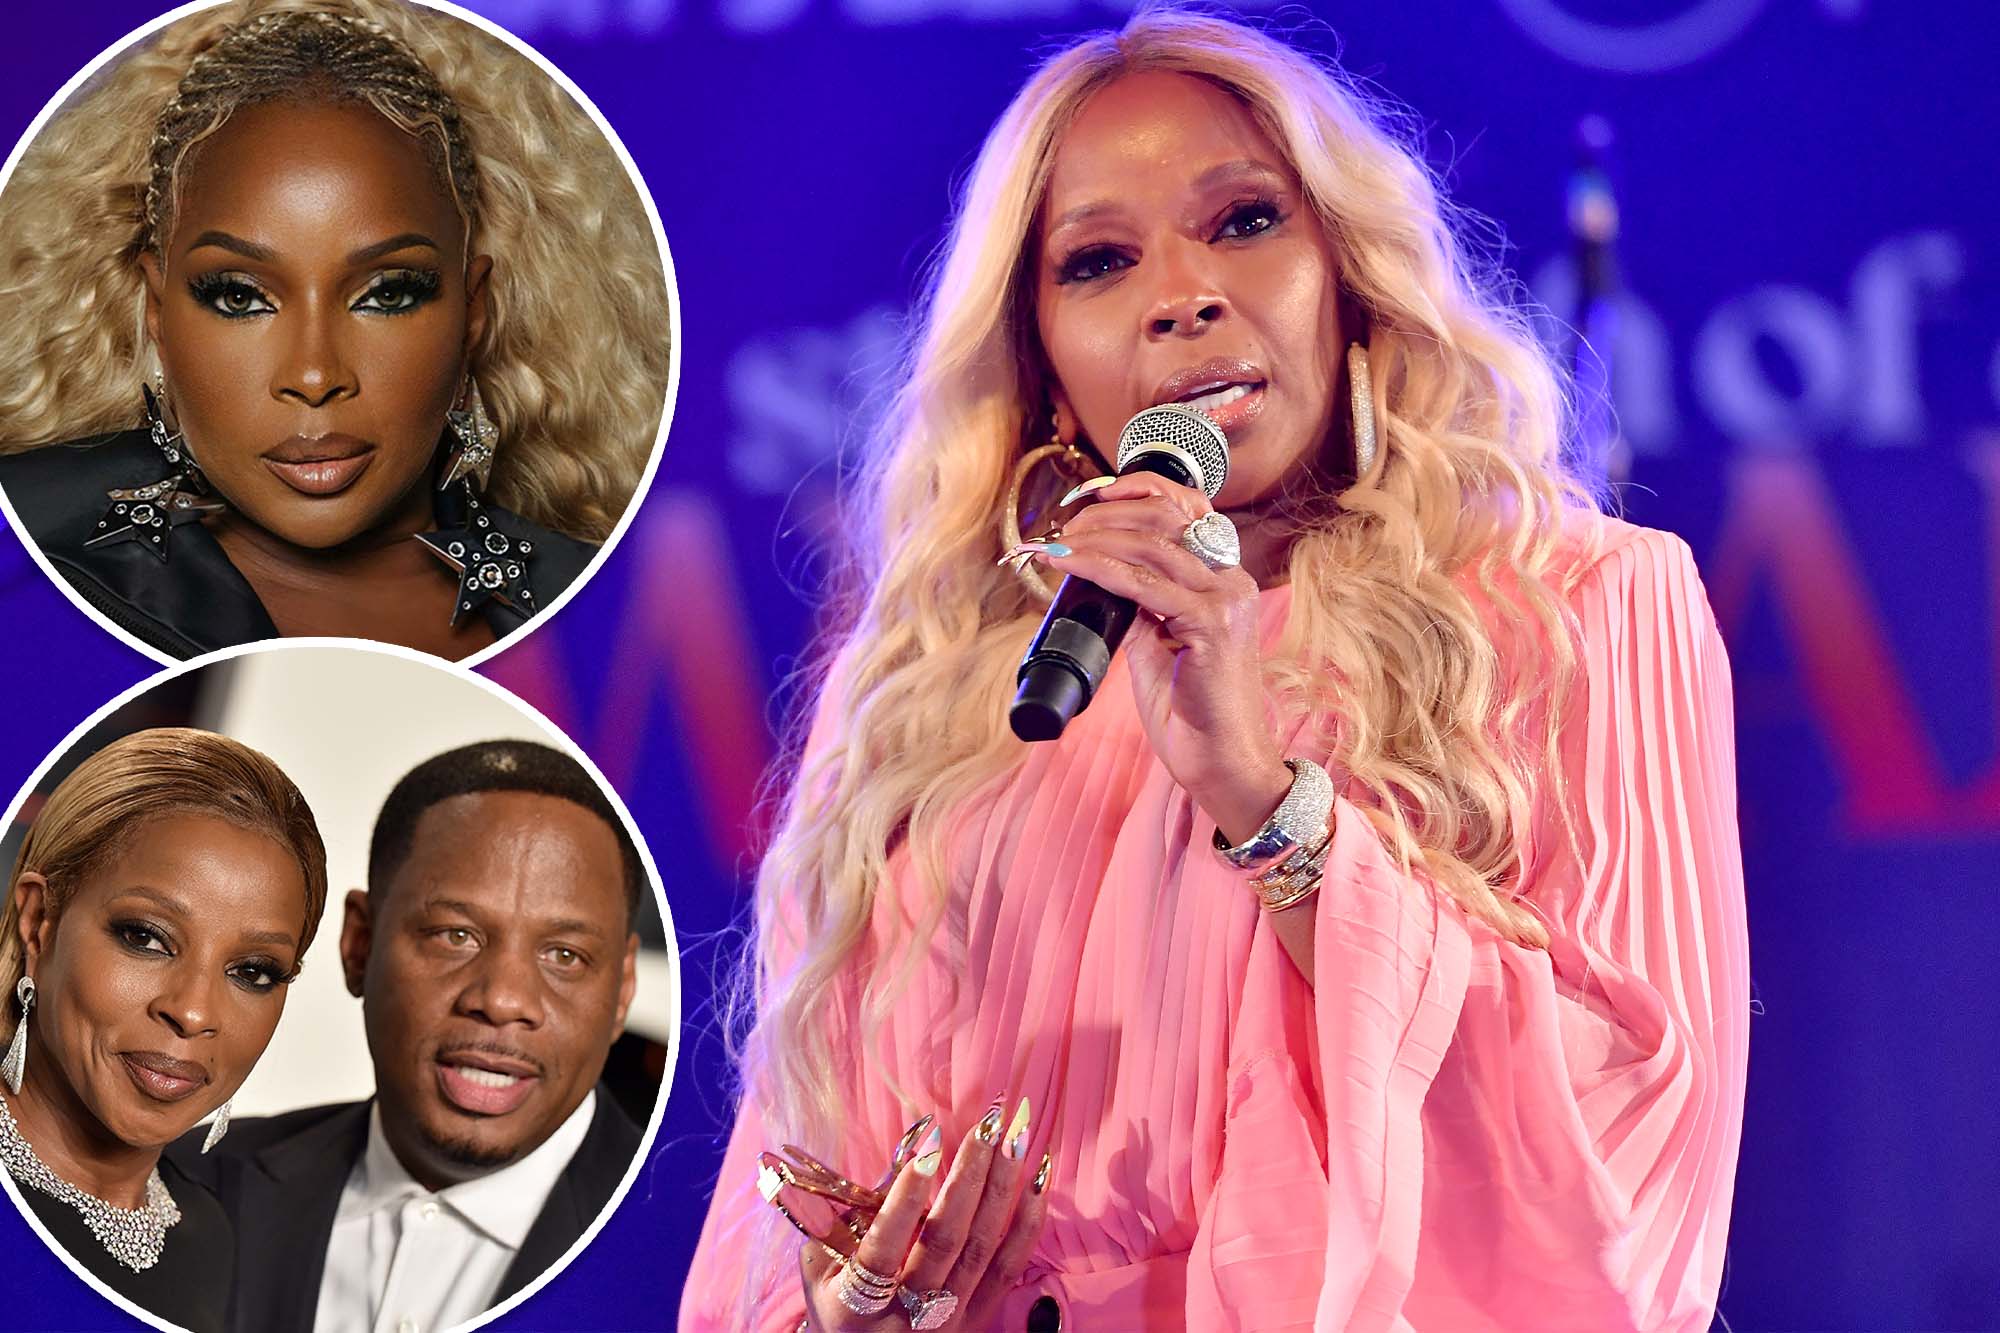 Mary J. Blige’s alimony ‘pissed’ her off — so she created Strength of a Woman Festival